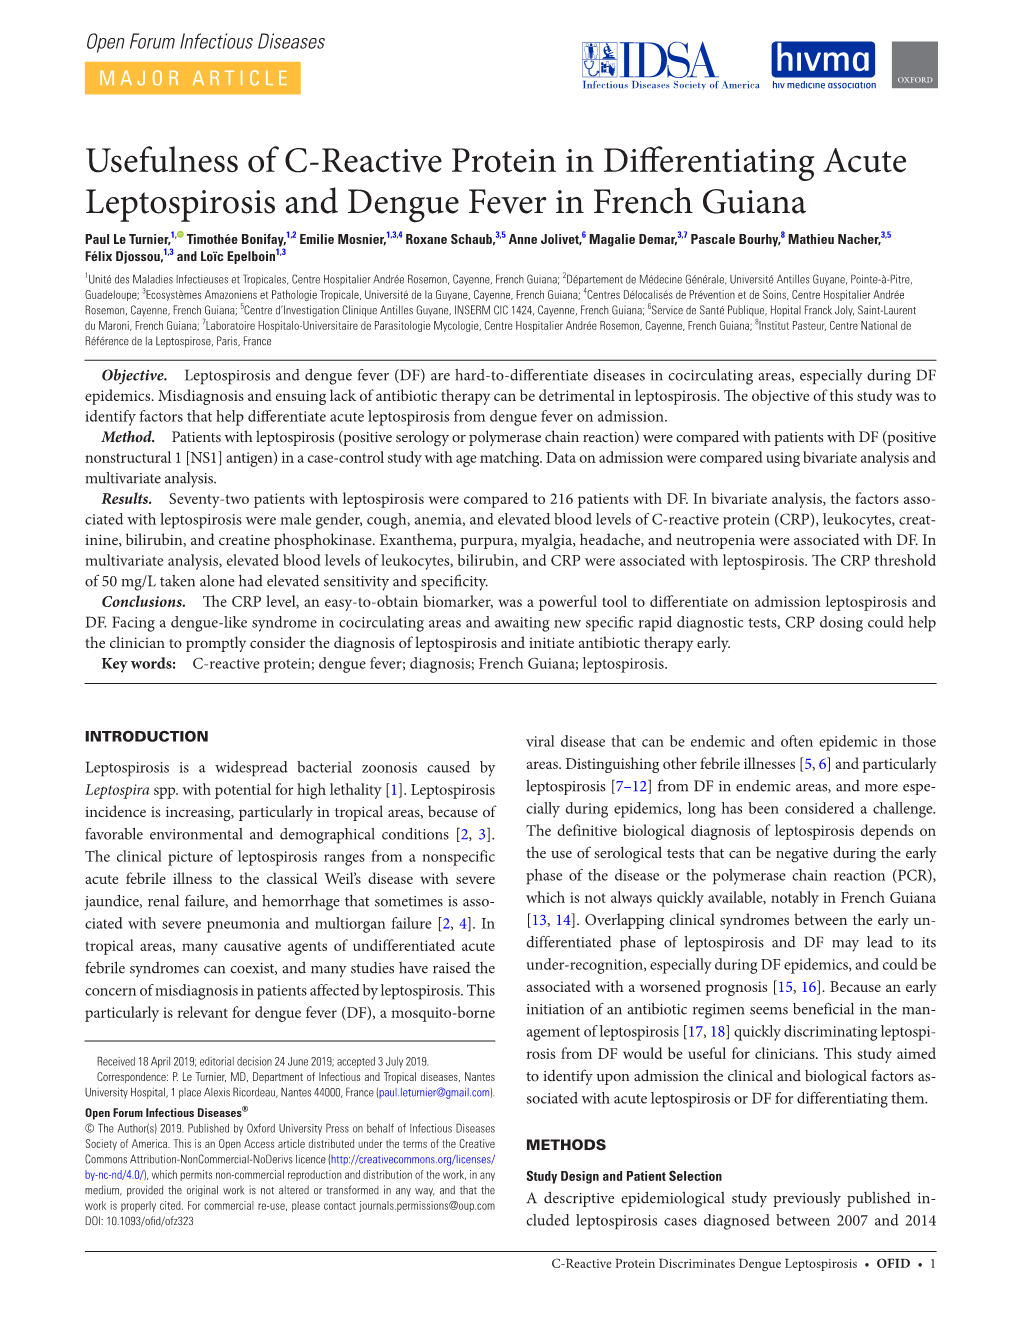 Usefulness of C-Reactive Protein in Differentiating Acute Leptospirosis